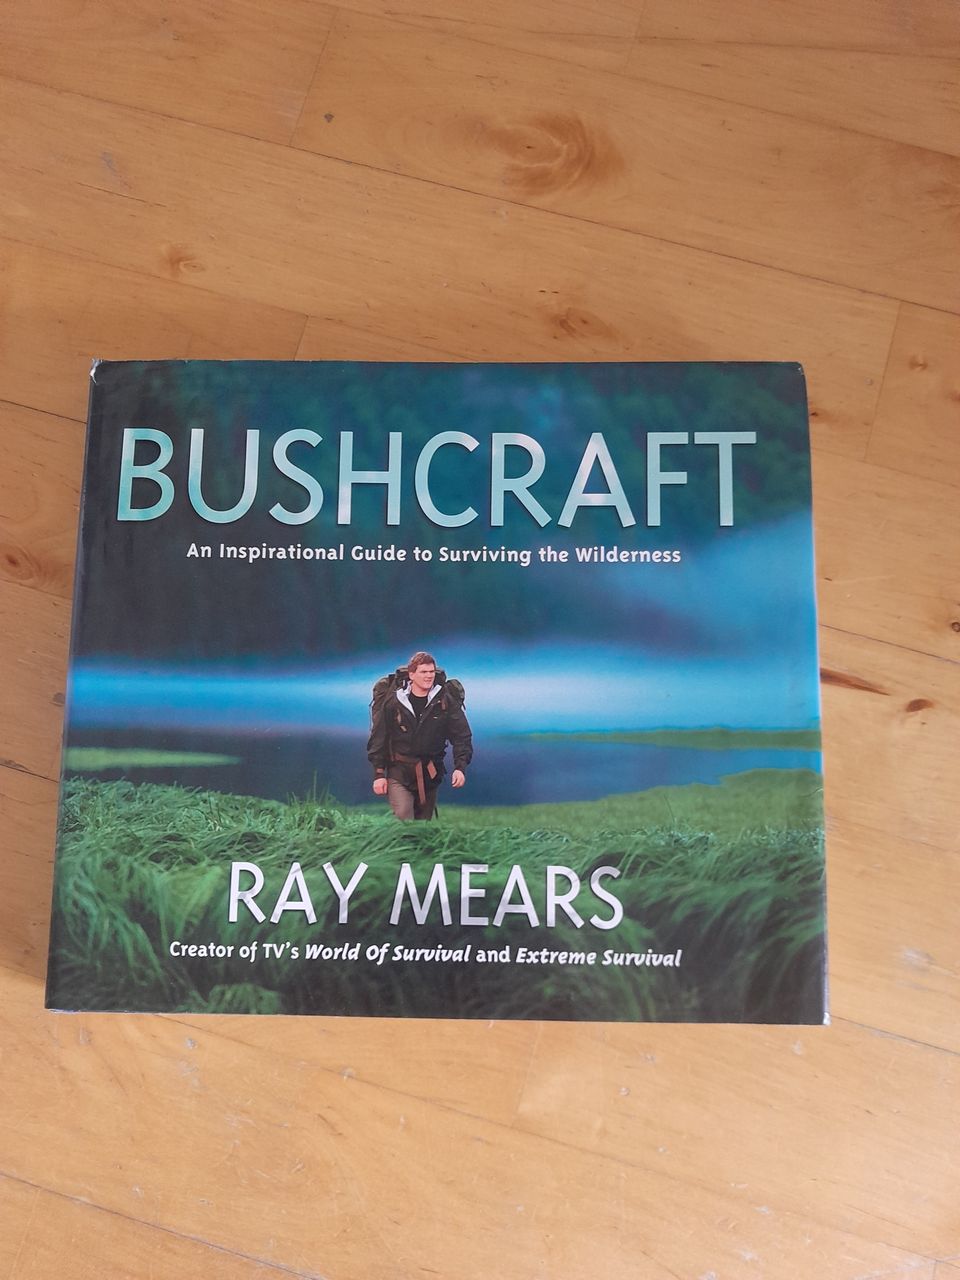 Bushcraft by Ray Mears